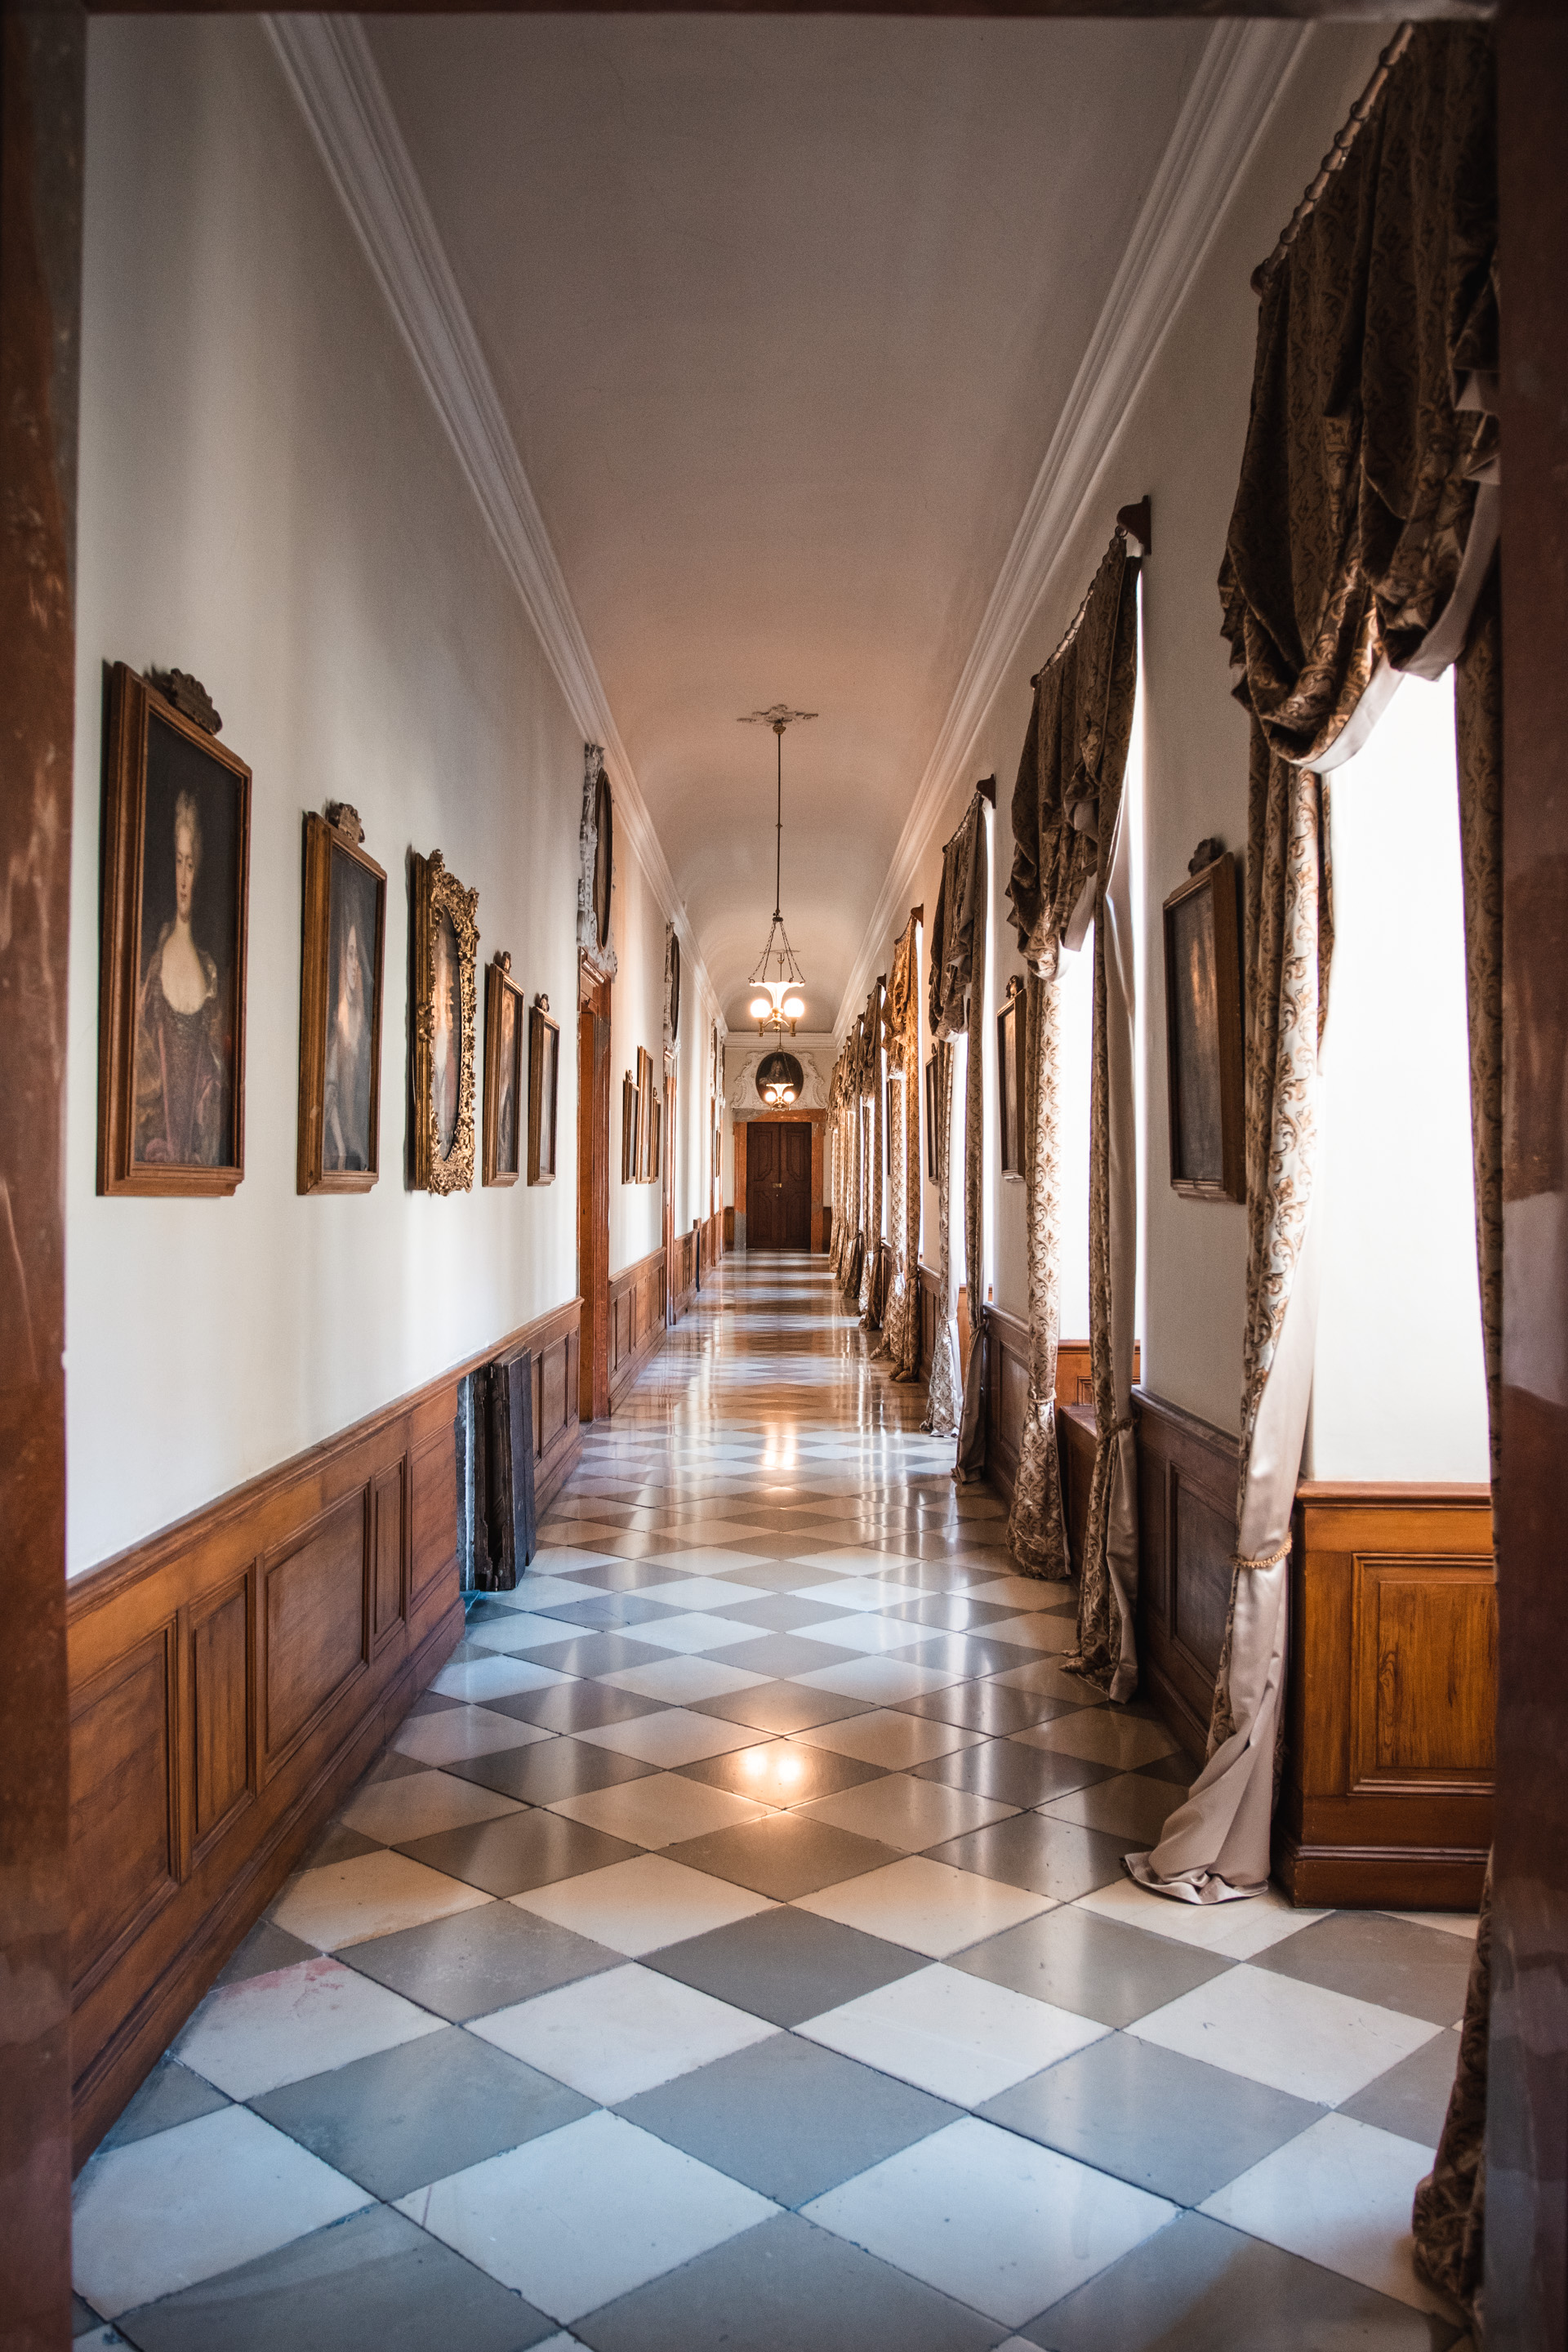 Photo of a hallway in Lednice Castle in Moravia.